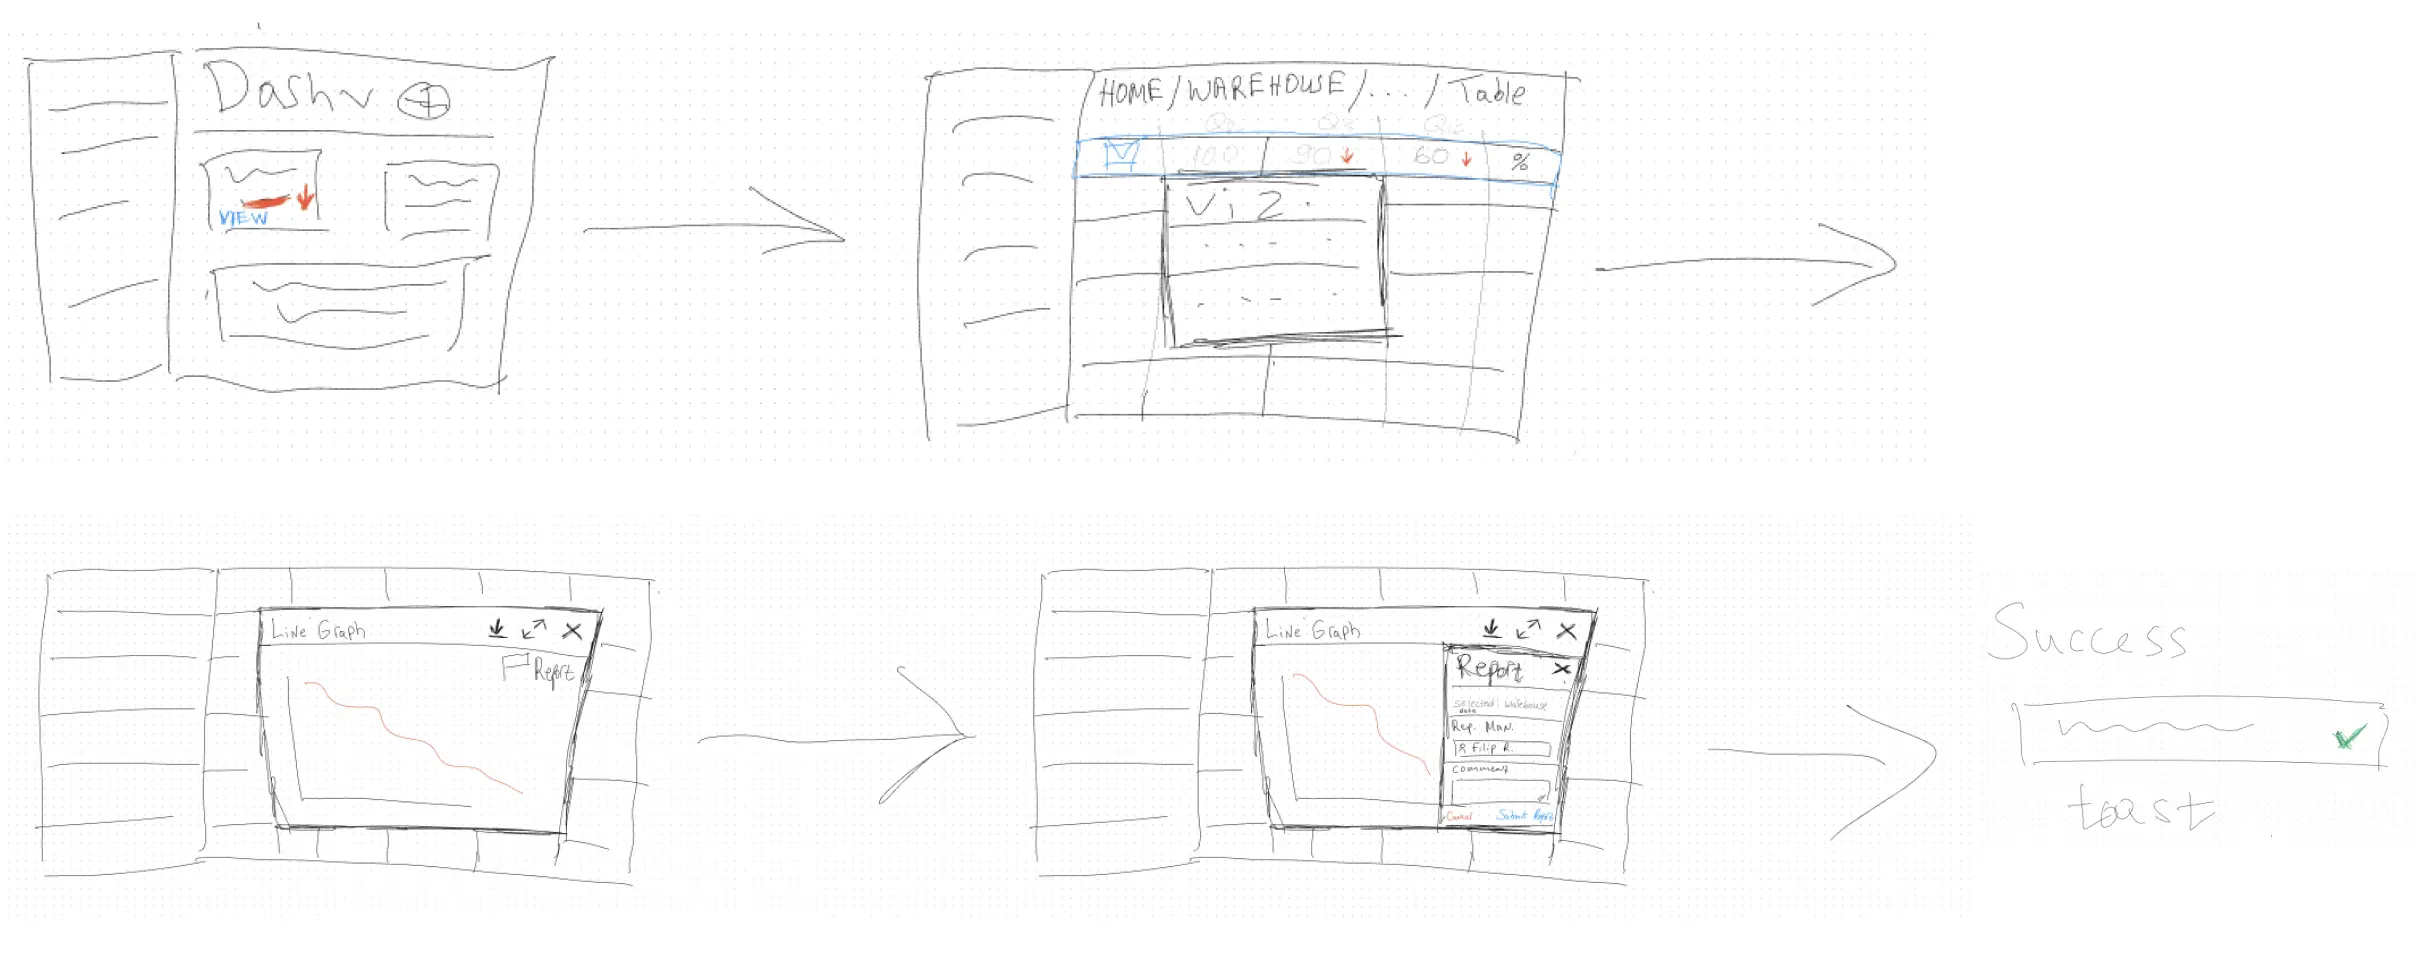 A hand-drawn flowchart with five steps, resembling initial wireframes, showing a UX/UI design: dashboard screenshot, screen with plots, line plots, and final success text.